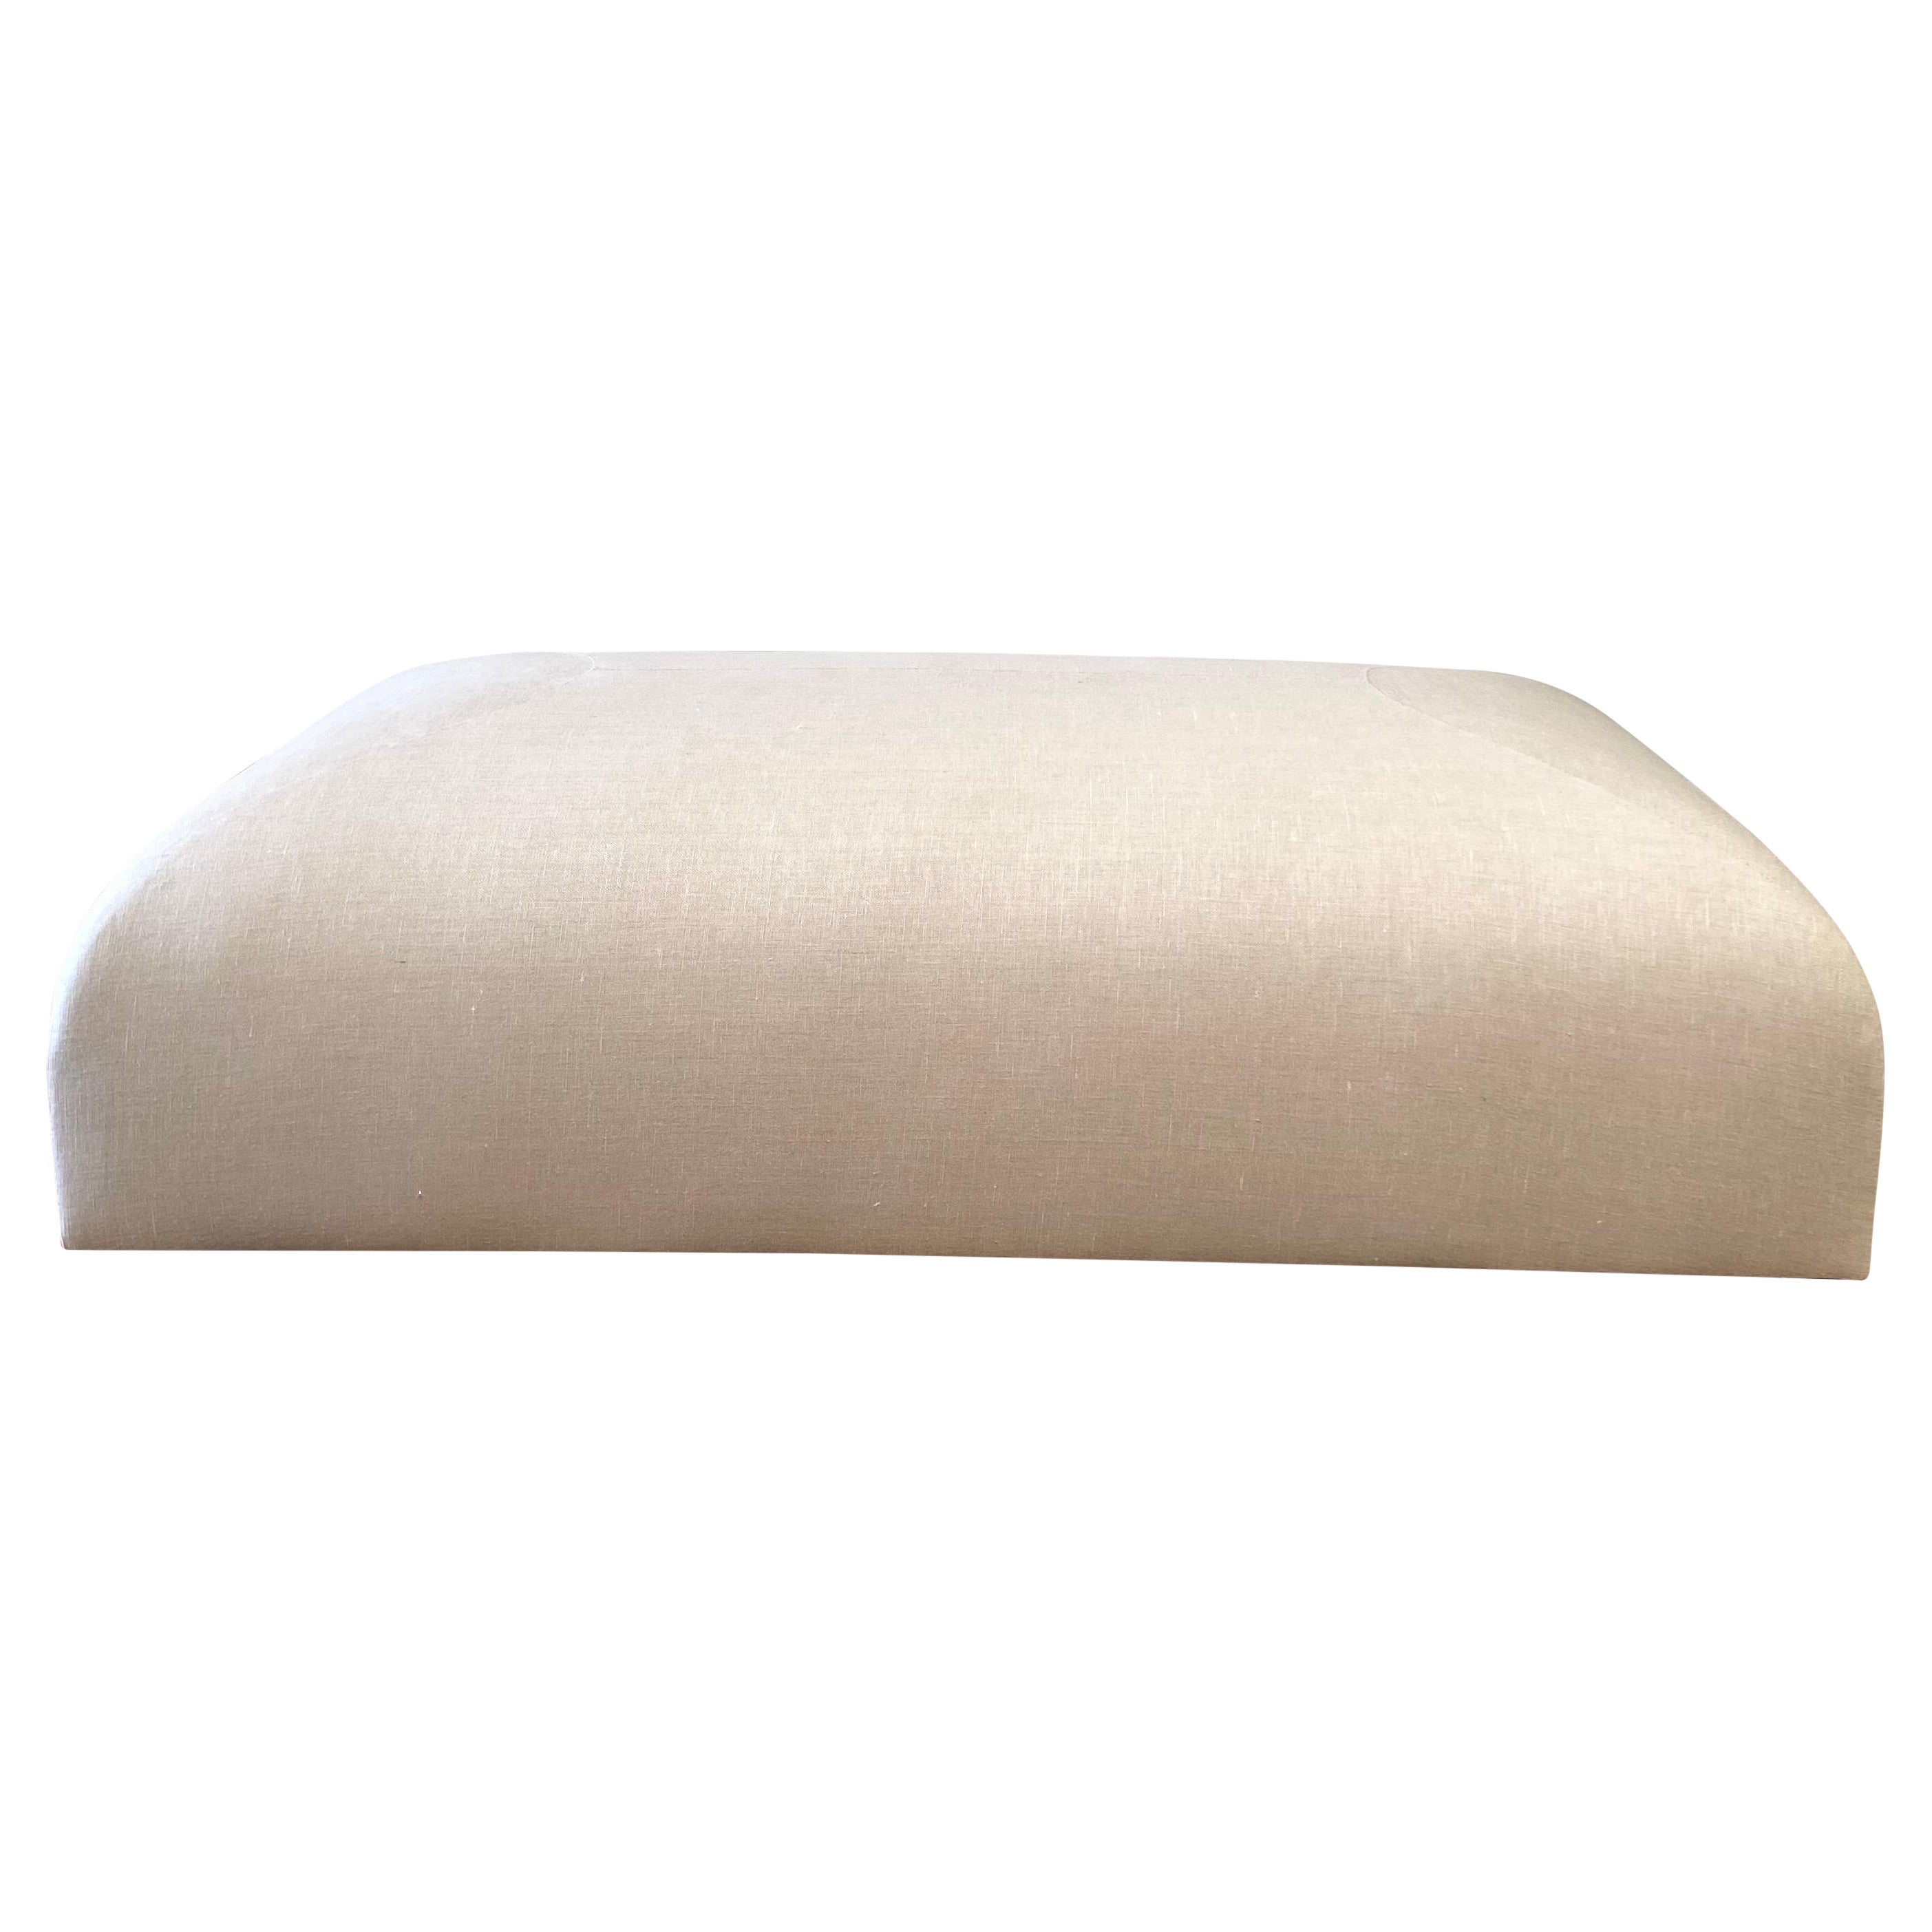 Custom Made Linen Ottoman with Rounded Corners For Sale